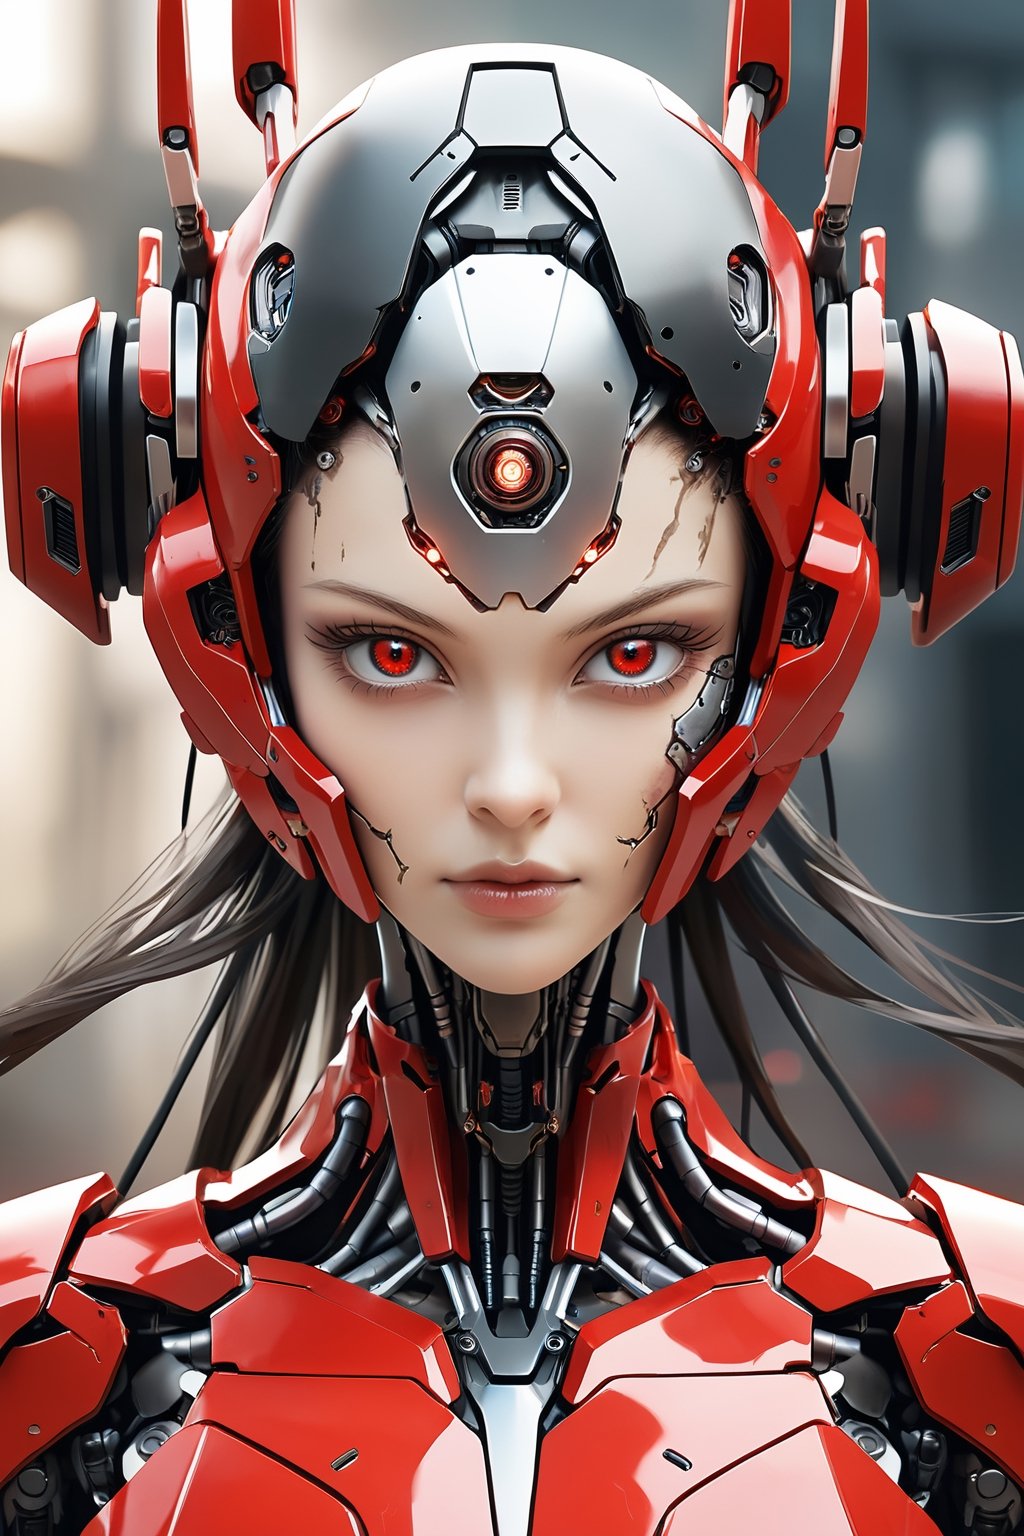 masterpiece, extremely detailed, upper body shot, cyborg, new model, evil, looking straight into camera, worn, damaged, blurry background, robot, mecha, science fiction, realistic, (((black and red color palette))), photo r3al, Wonder of Beauty, 